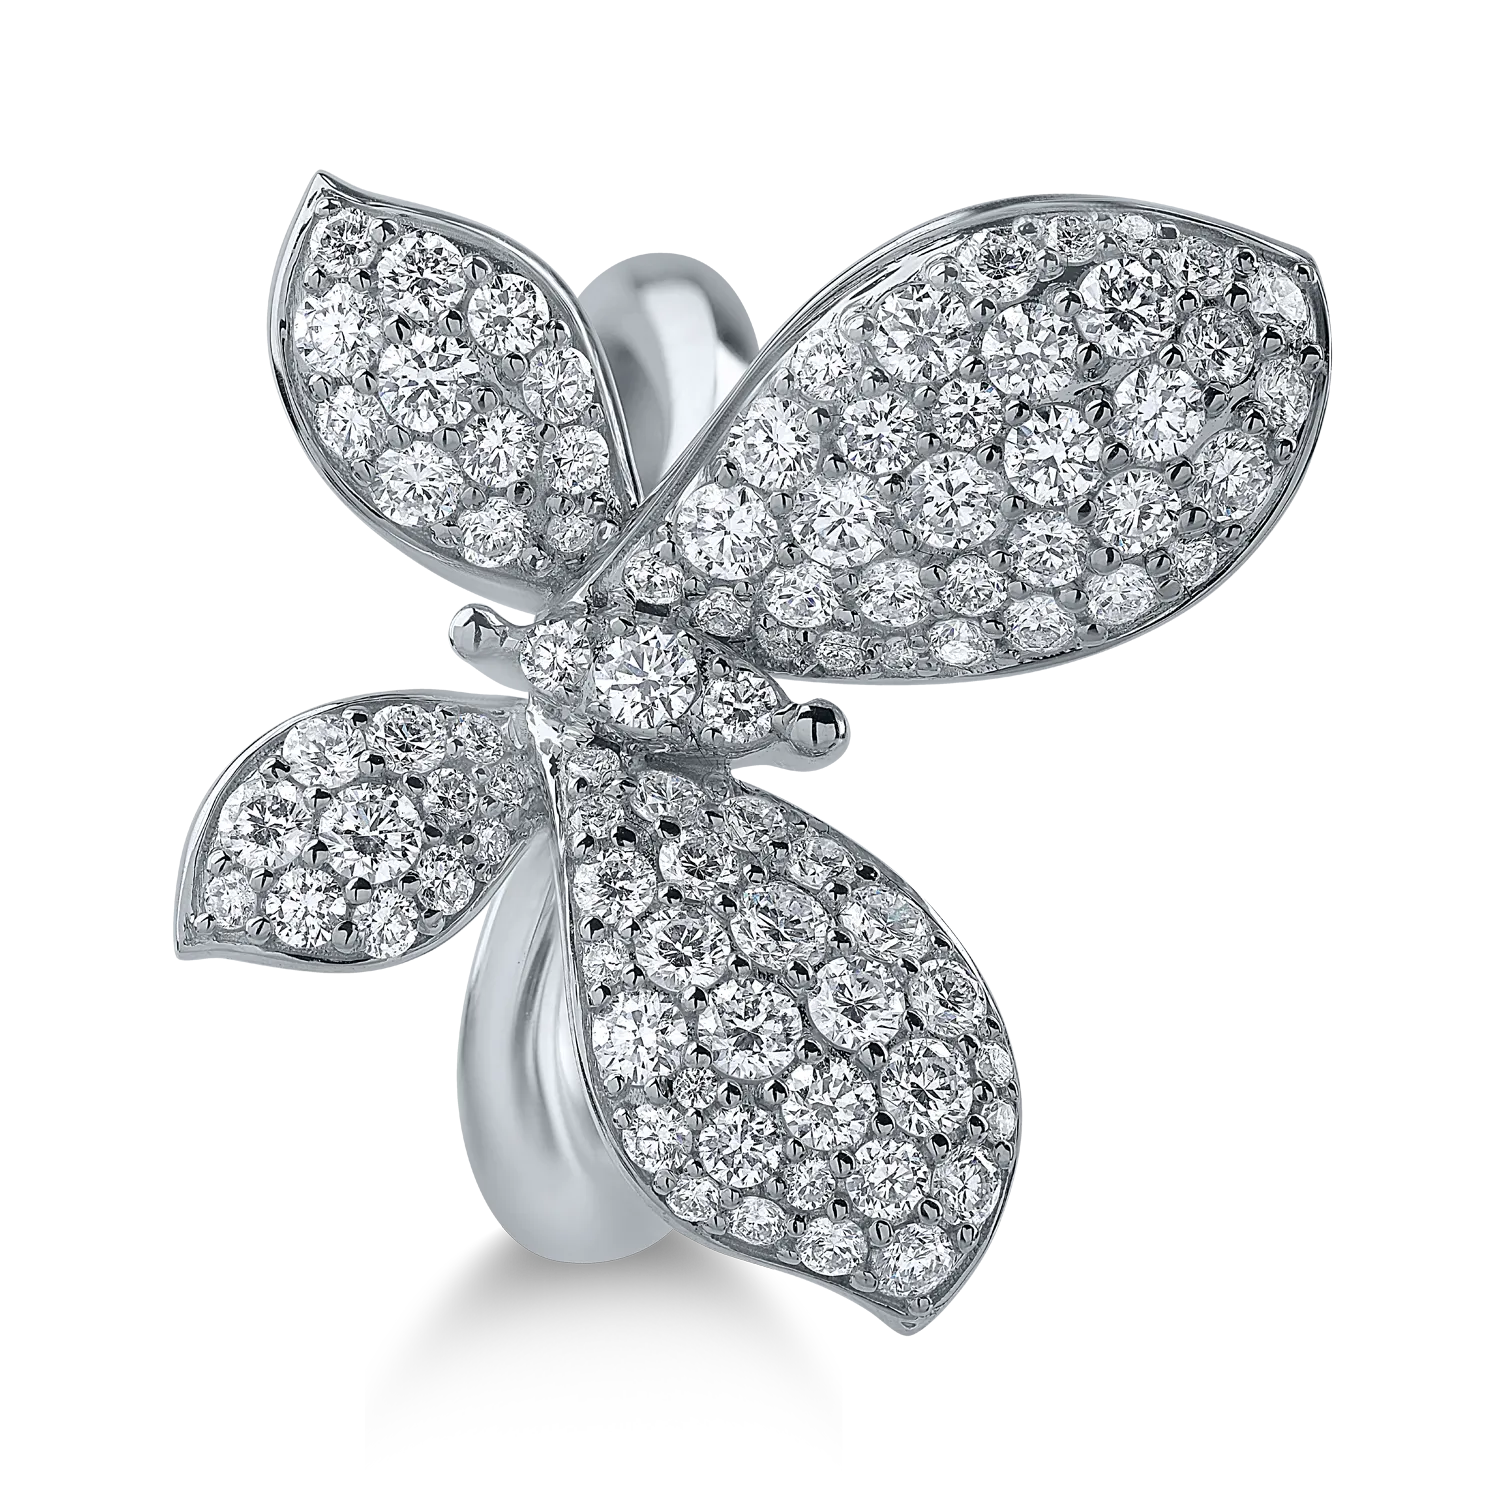 White gold butterfly ring with 1.45ct diamonds